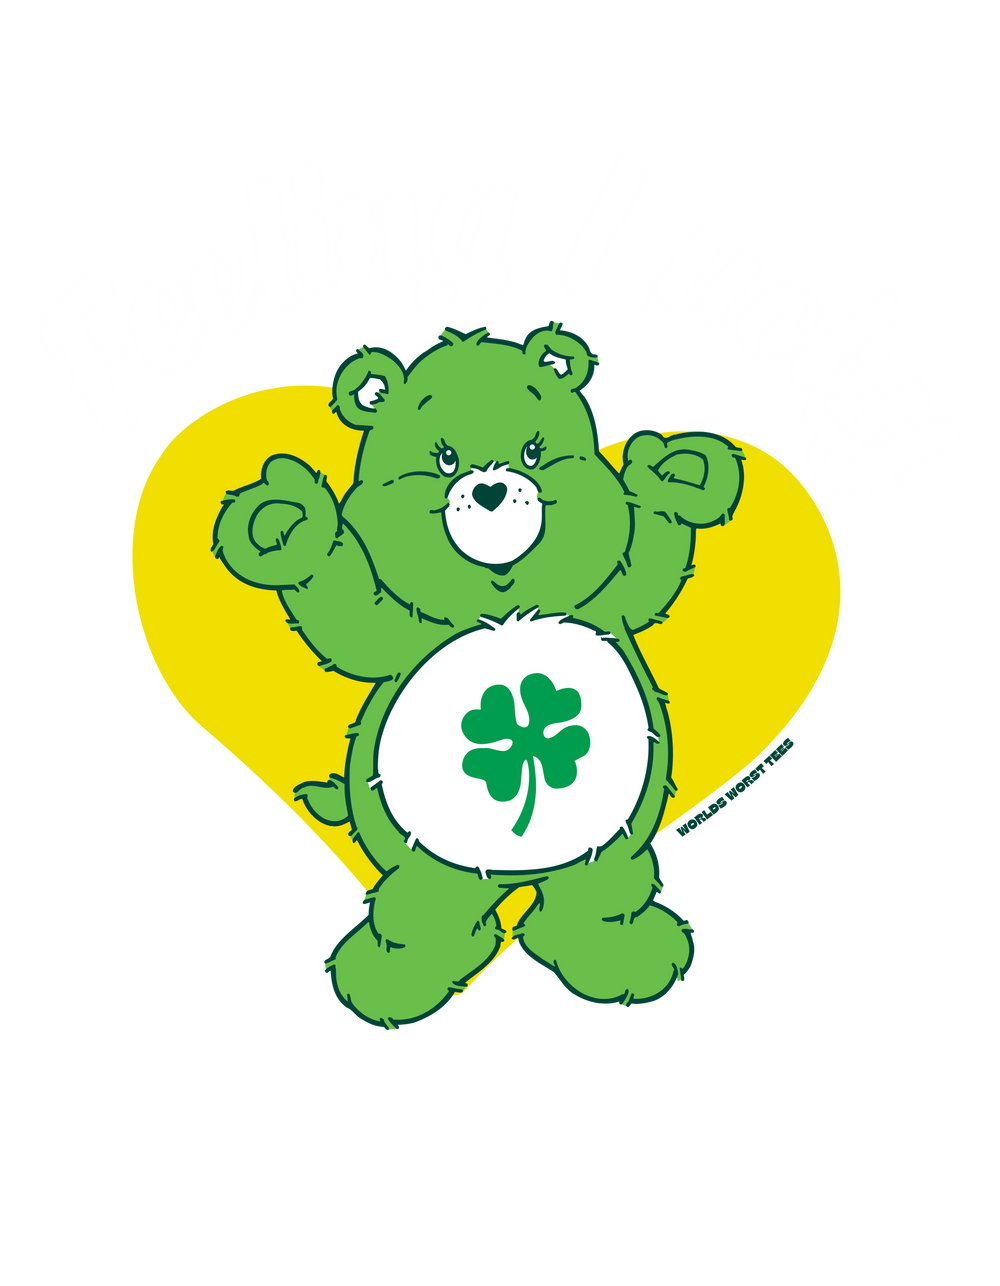 Feeling Lucky Crew unisex sweatshirt featuring a cartoon bear with a clover. Heavy blend fabric, ribbed knit collar, no itchy seams. 50% cotton, 50% polyester, loose fit. Sizes S-5XL.